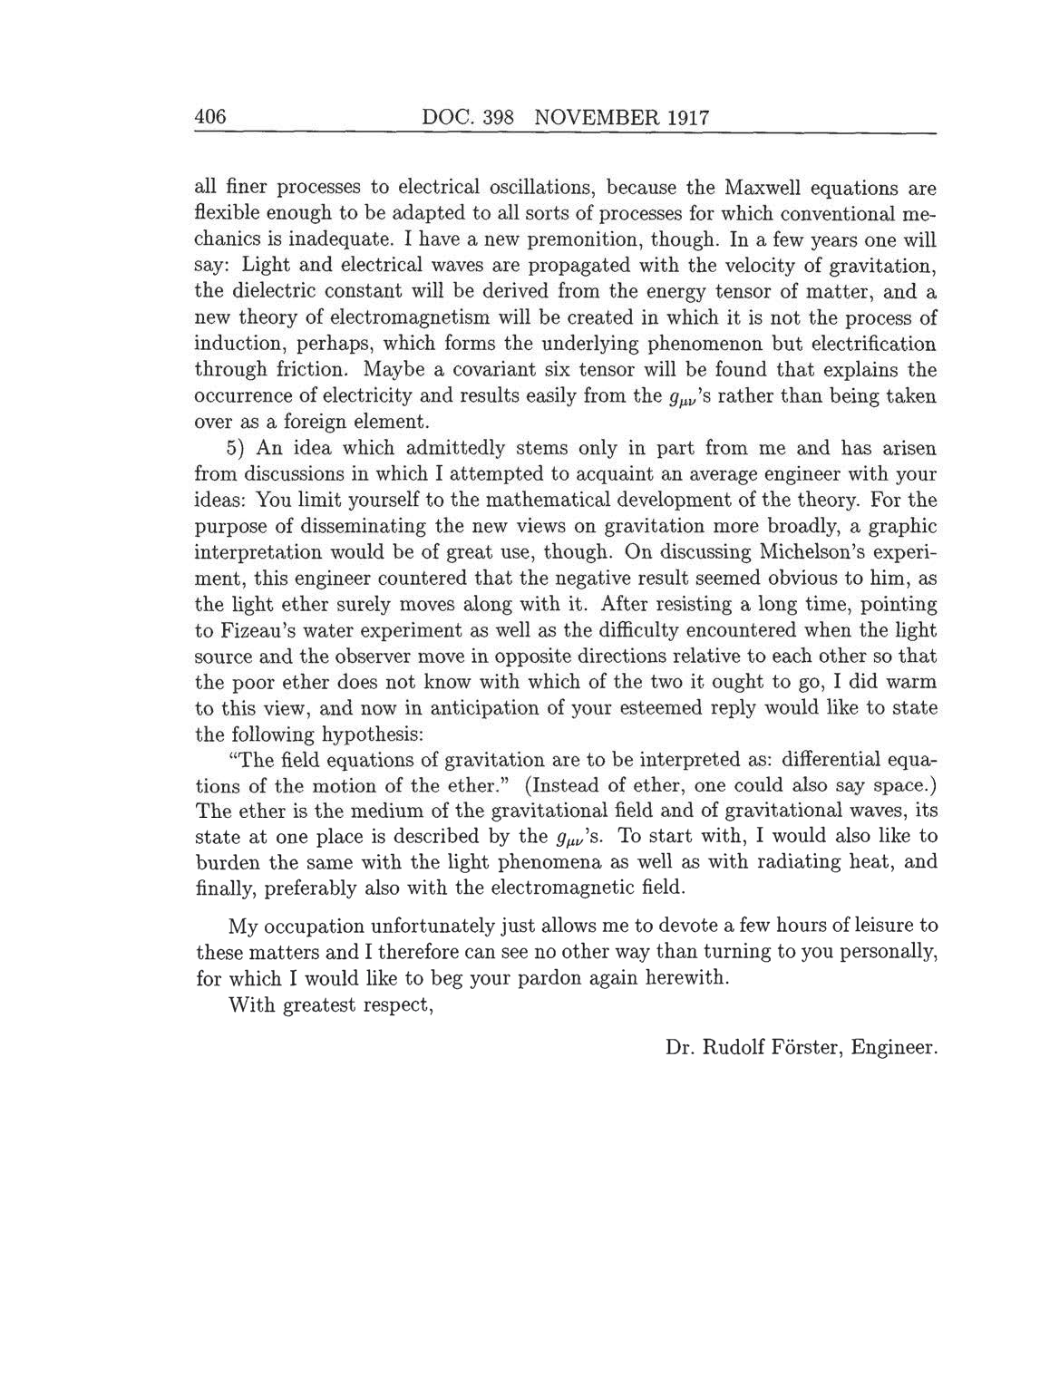 Volume 8: The Berlin Years: Correspondence, 1914-1918 (English translation supplement) page 406